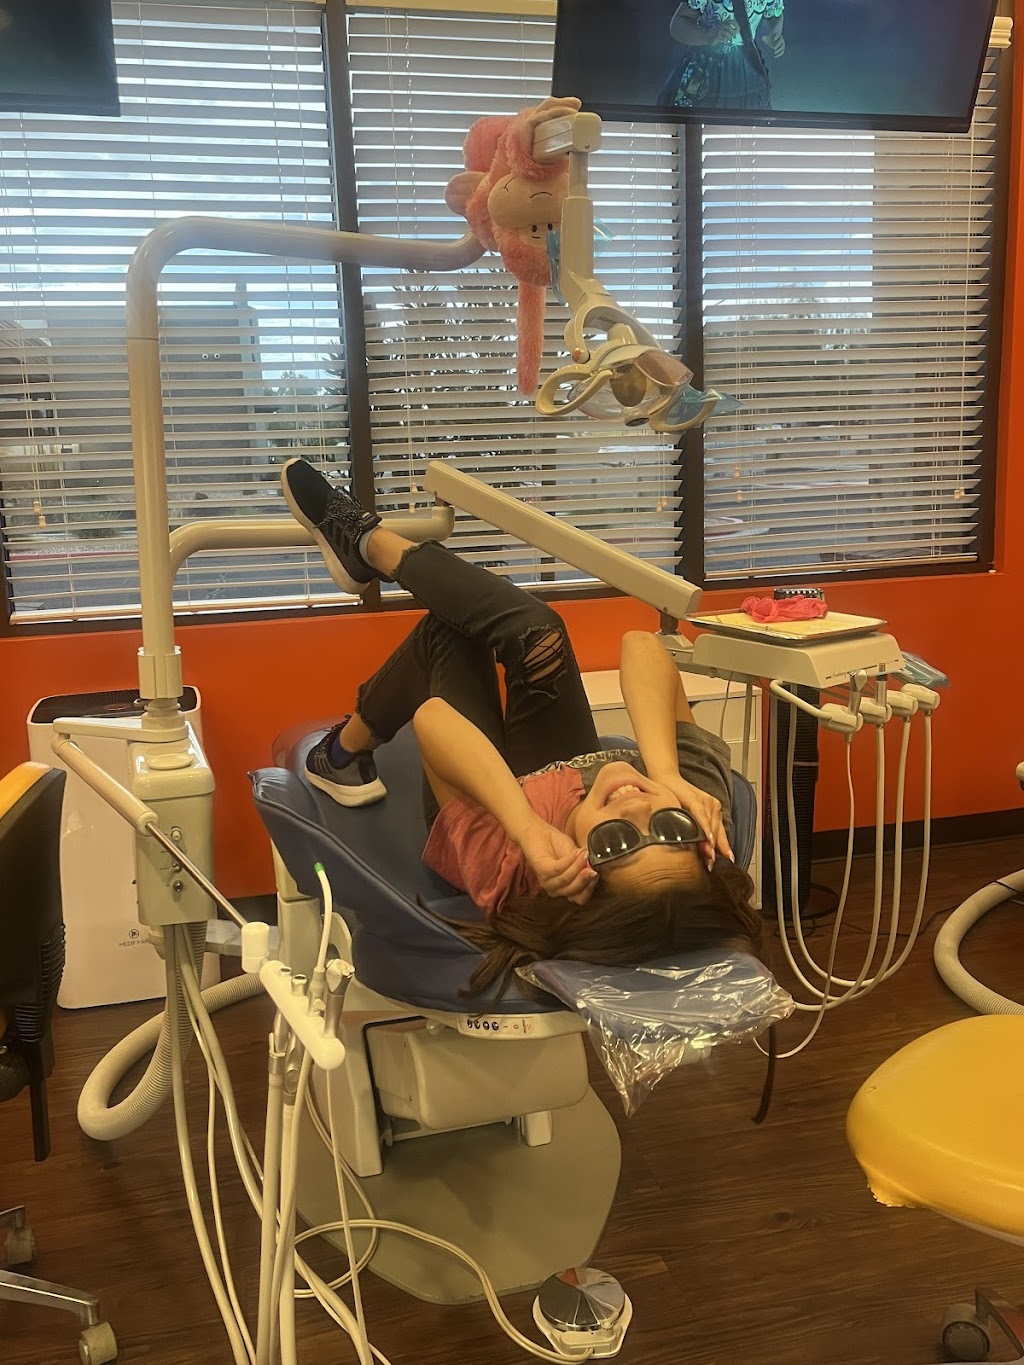 Surprise Pediatric Dentistry and Orthodontics | 15331 W Bell Rd Suite 112, Surprise, AZ 85374, USA | Phone: (602) 730-6481